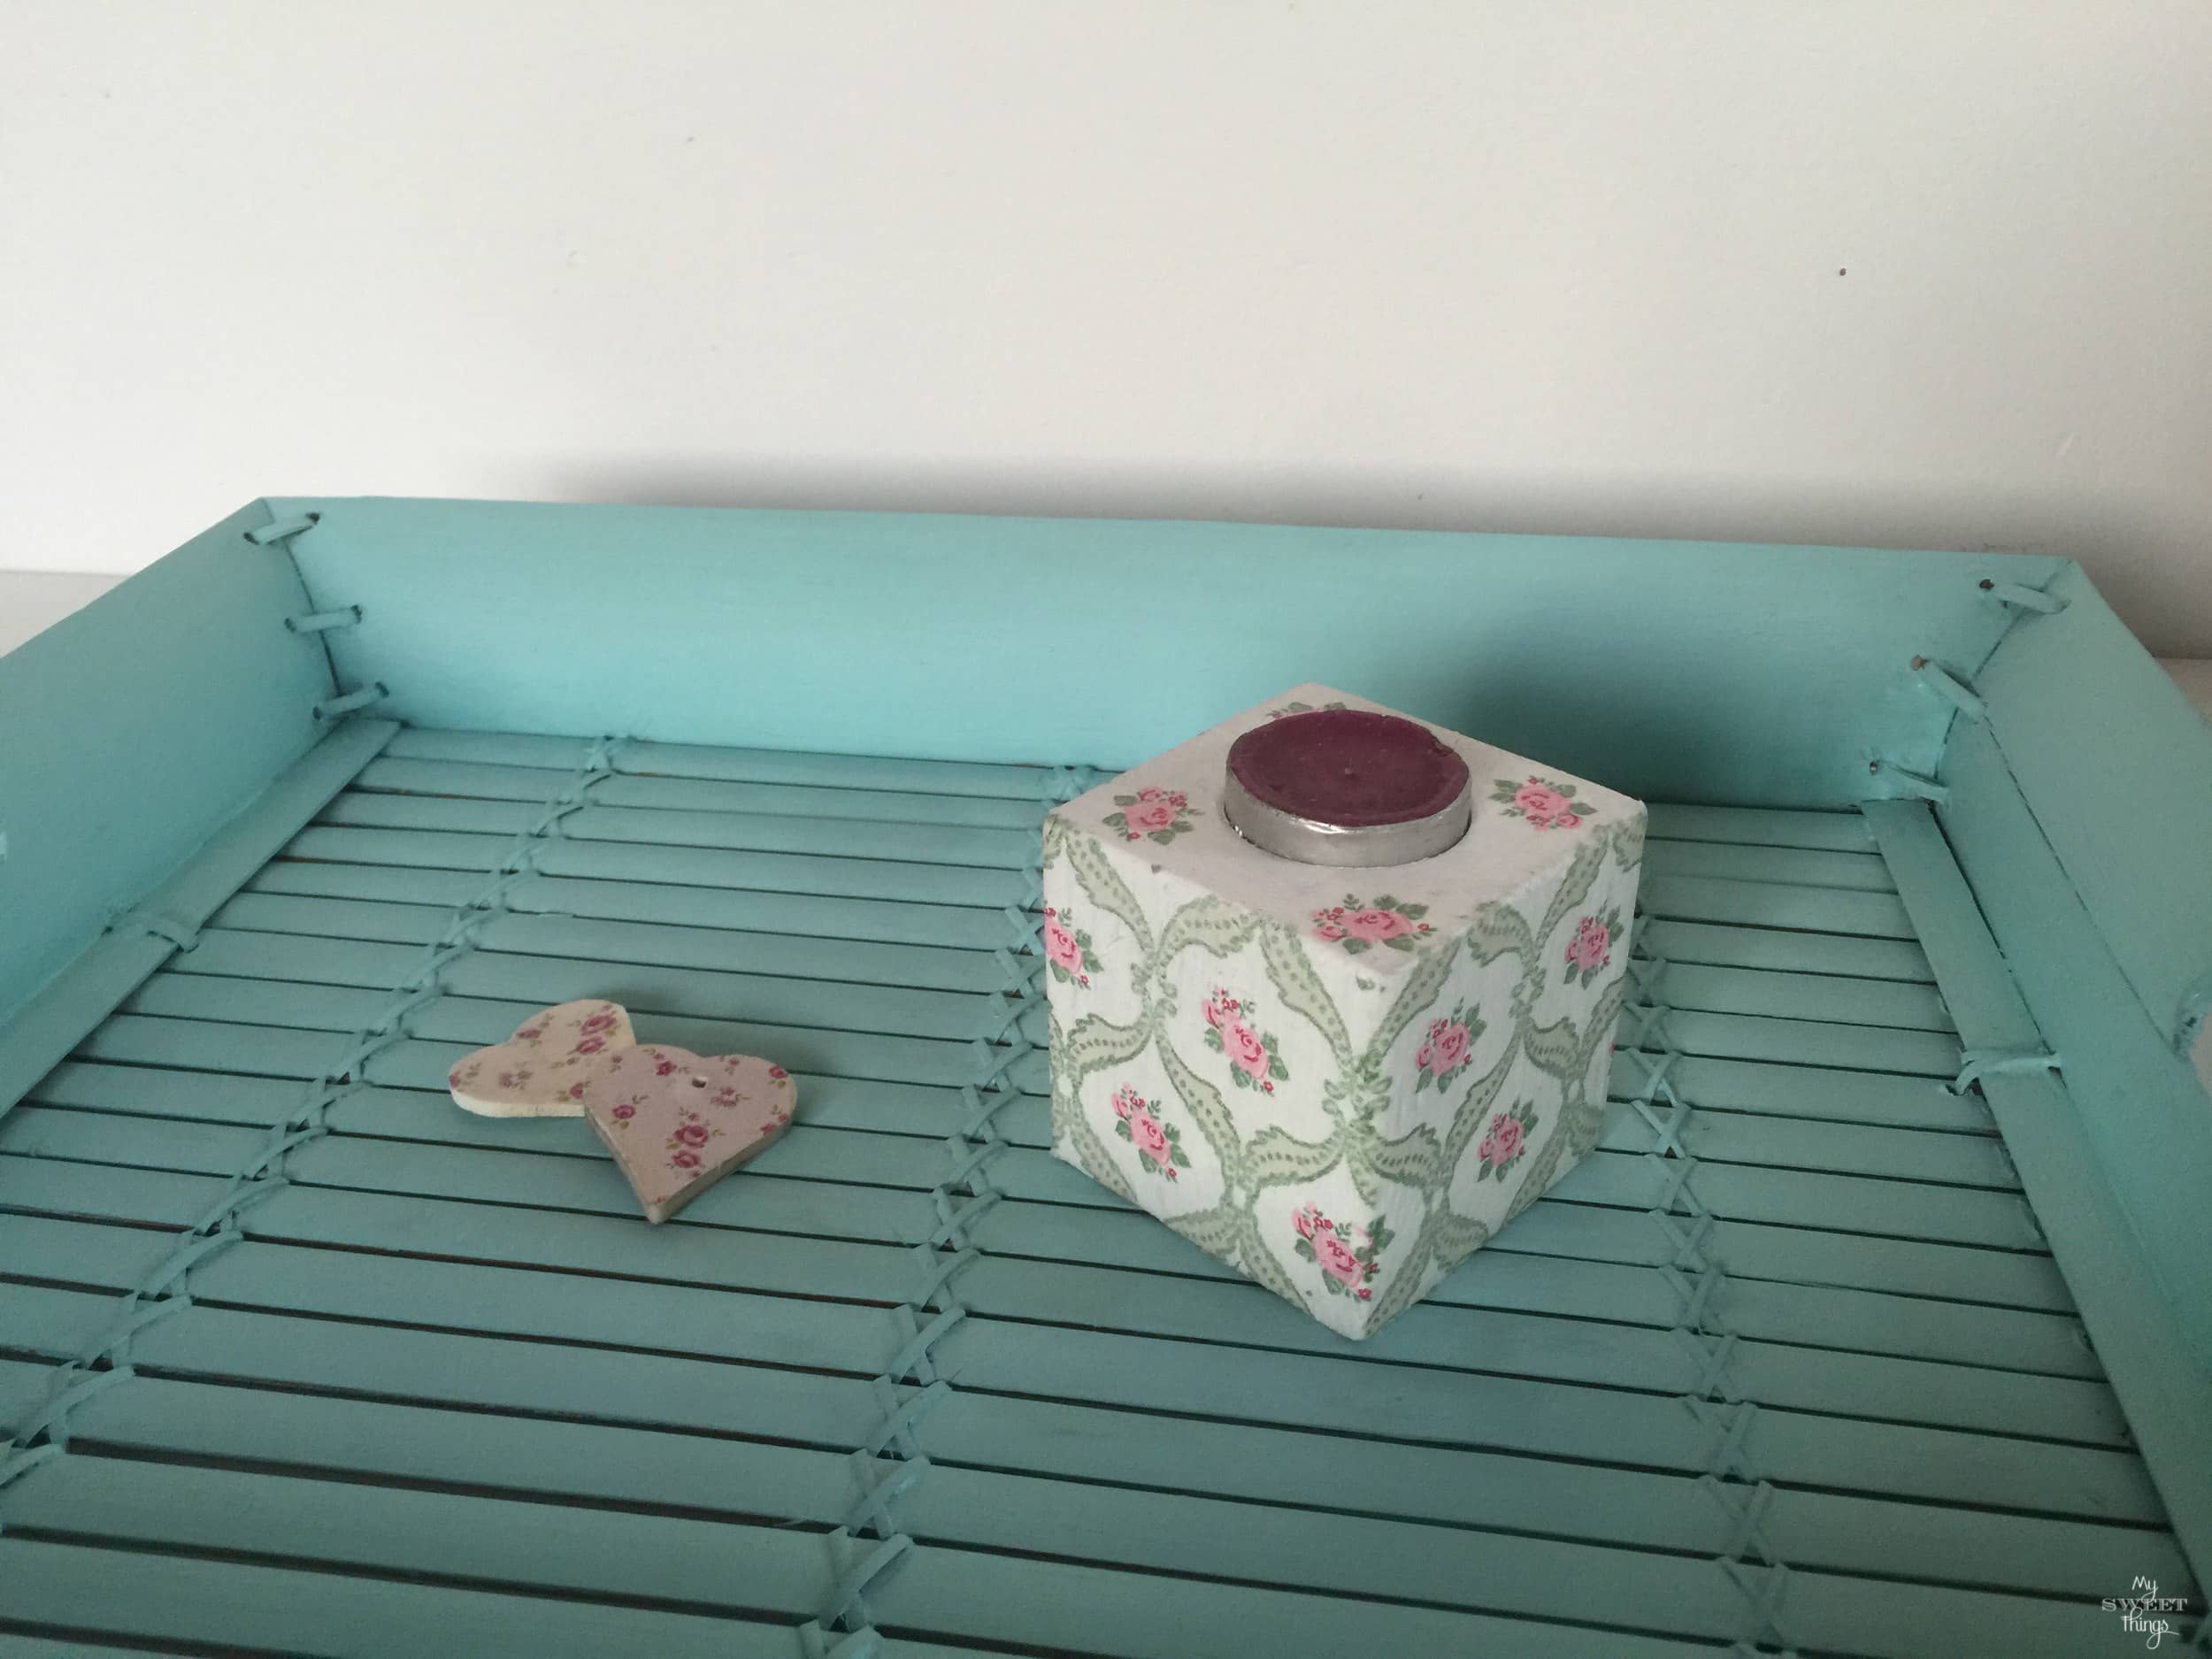 How to make a pretty coastal style tray upcycling and painting an old one · My Sweet Things